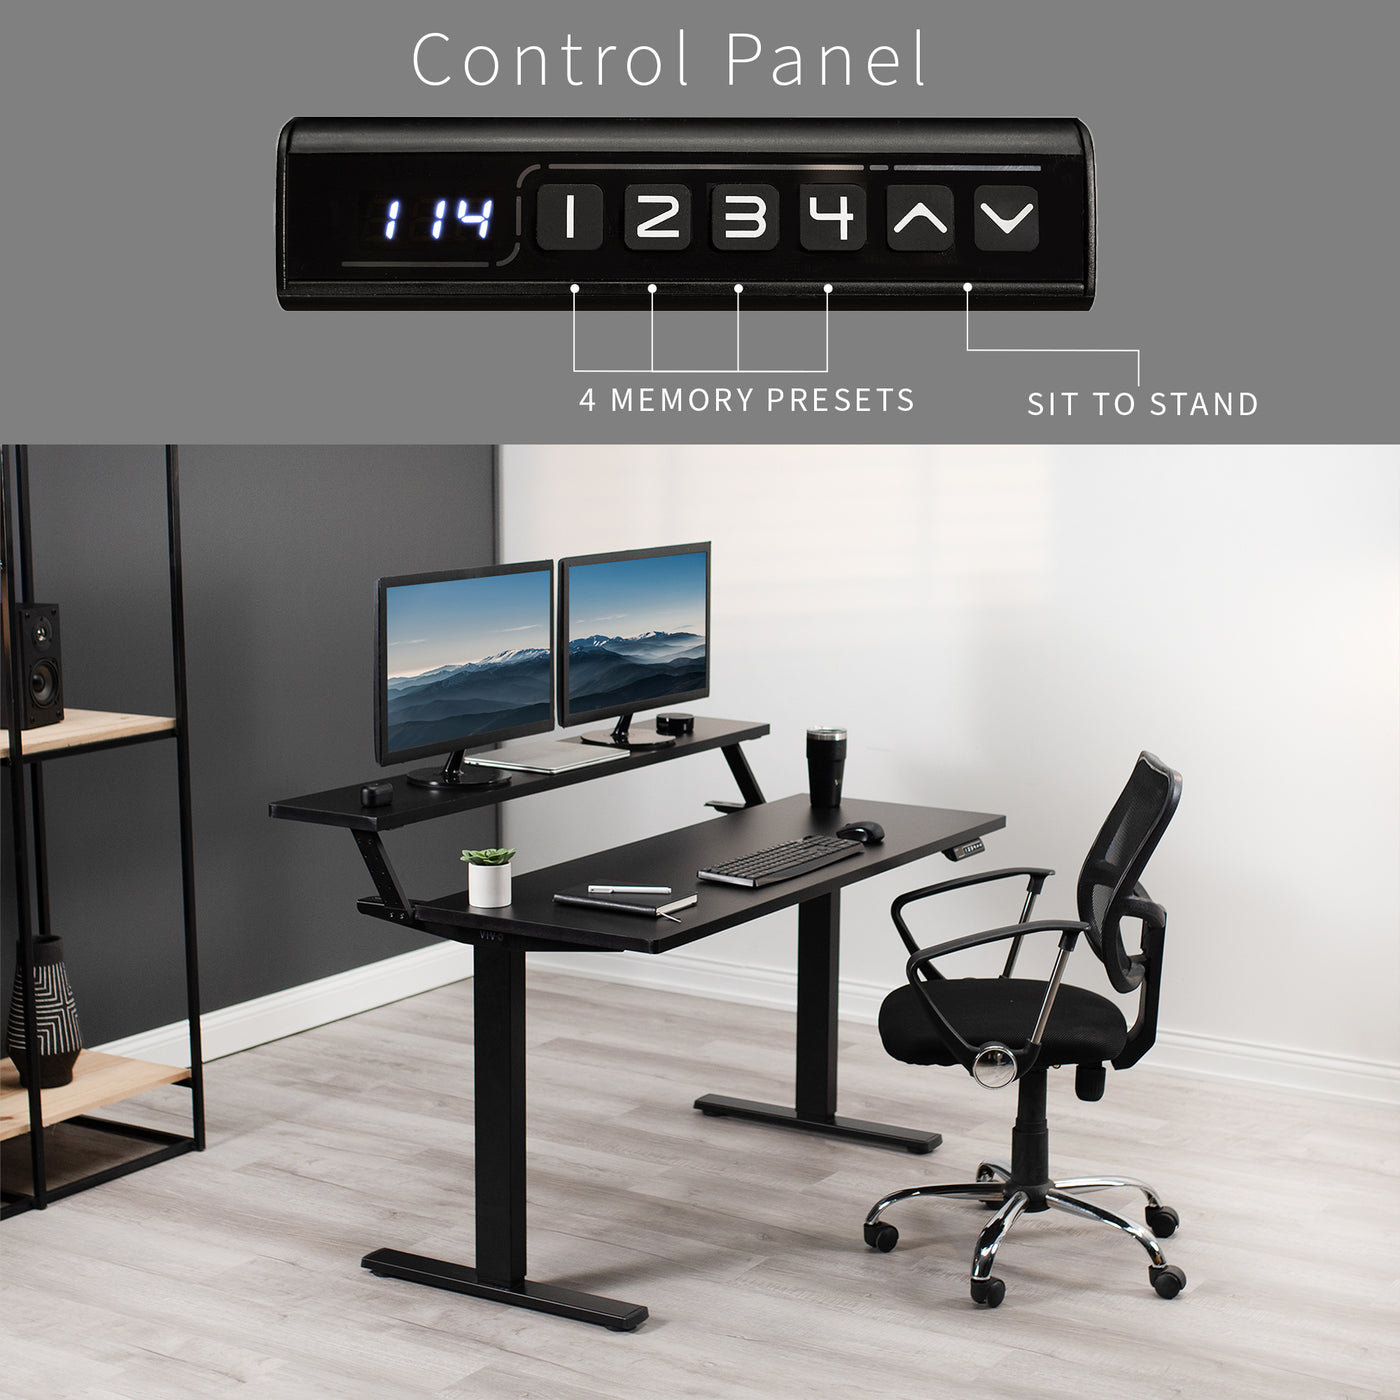 Two-tier split top desk with programmable memory controller panel.